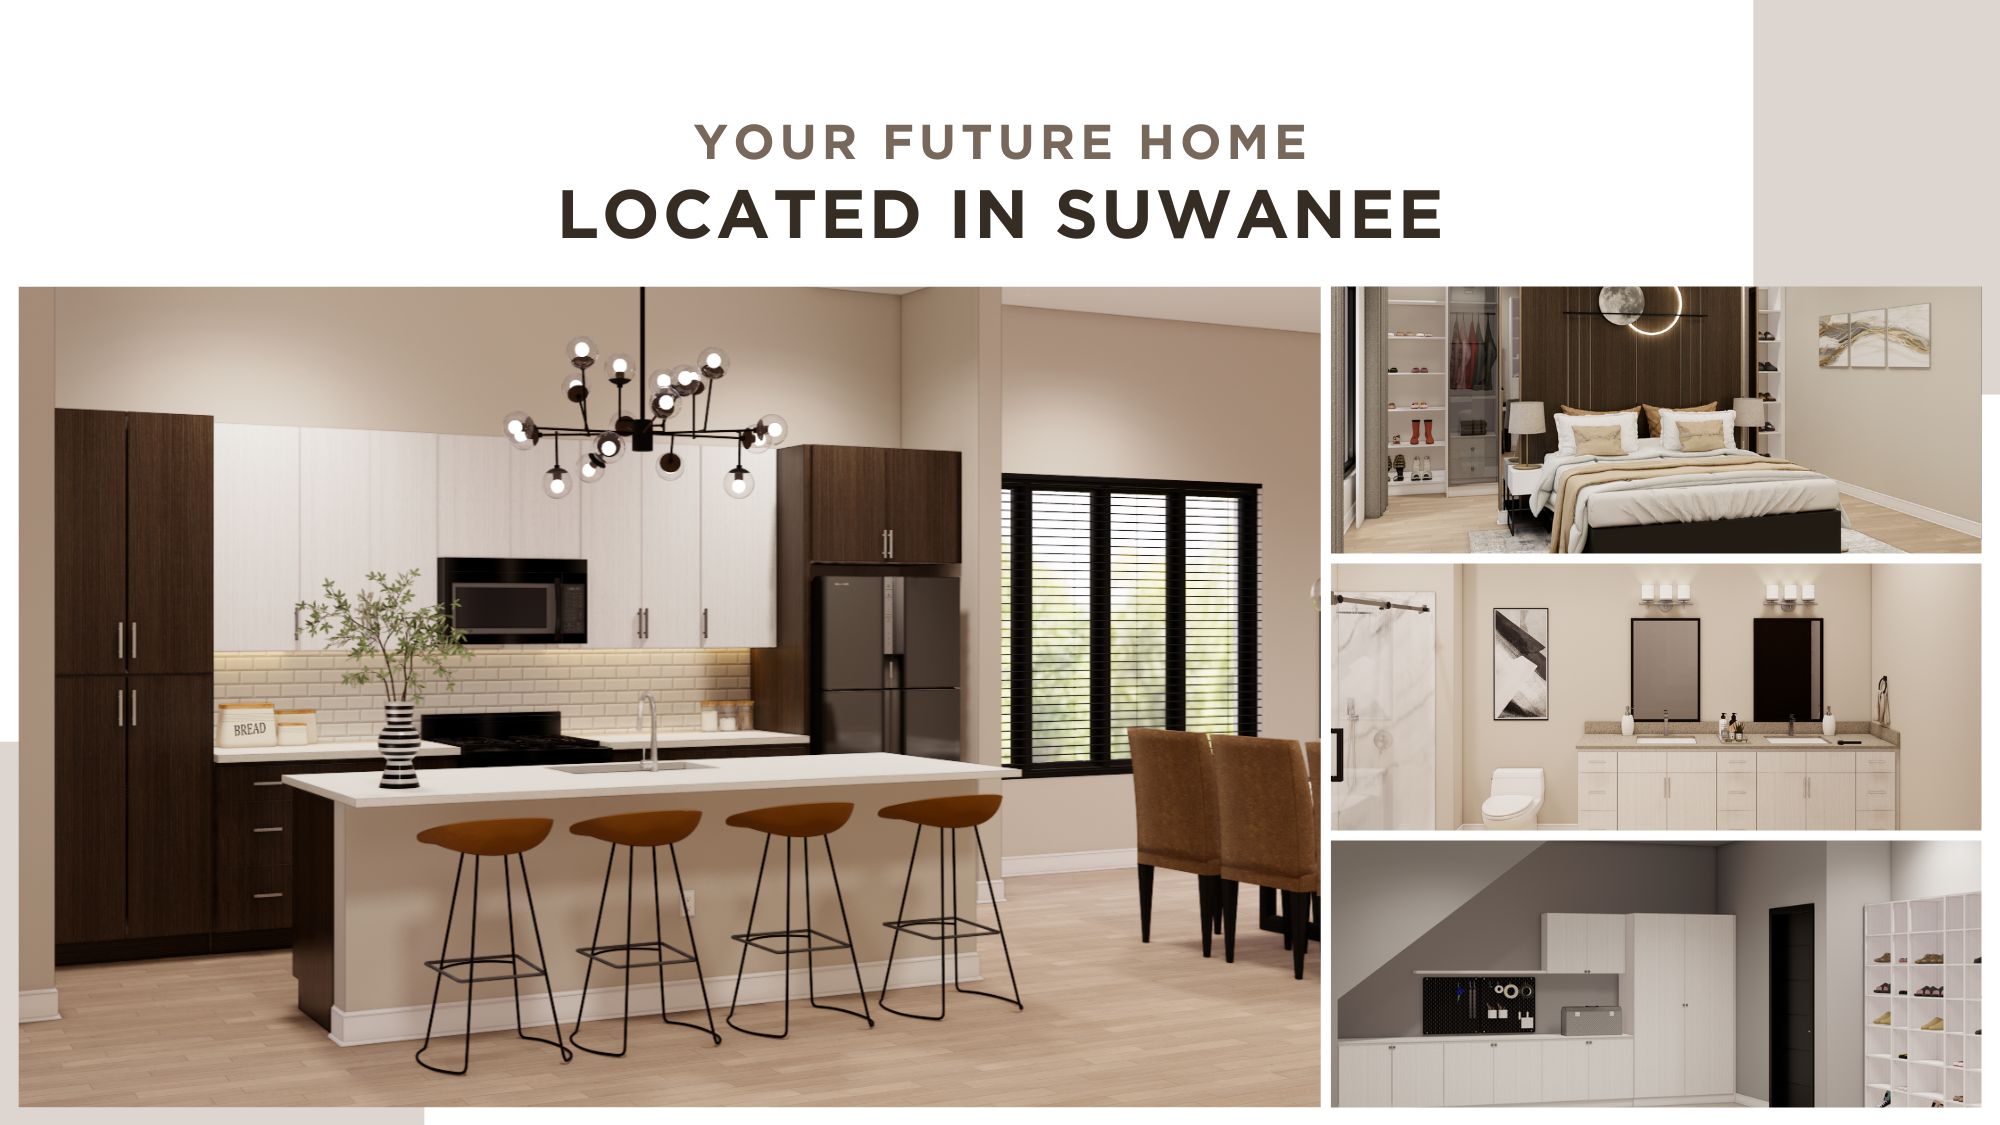 Discover Your Future Home in Family-Friendly Suwanee! 🏡